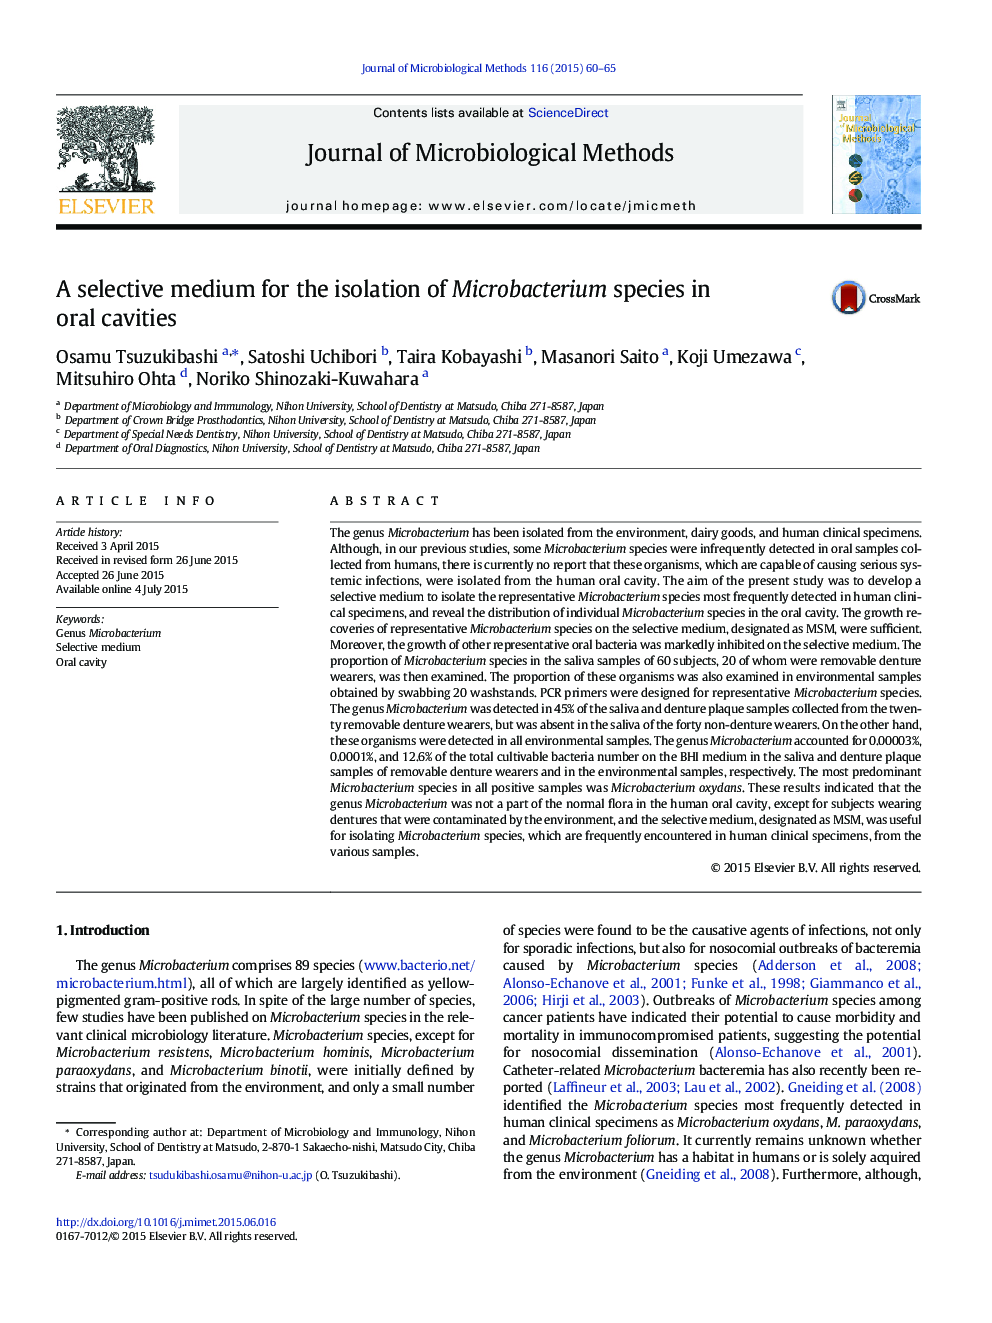 A selective medium for the isolation of Microbacterium species in oral cavities